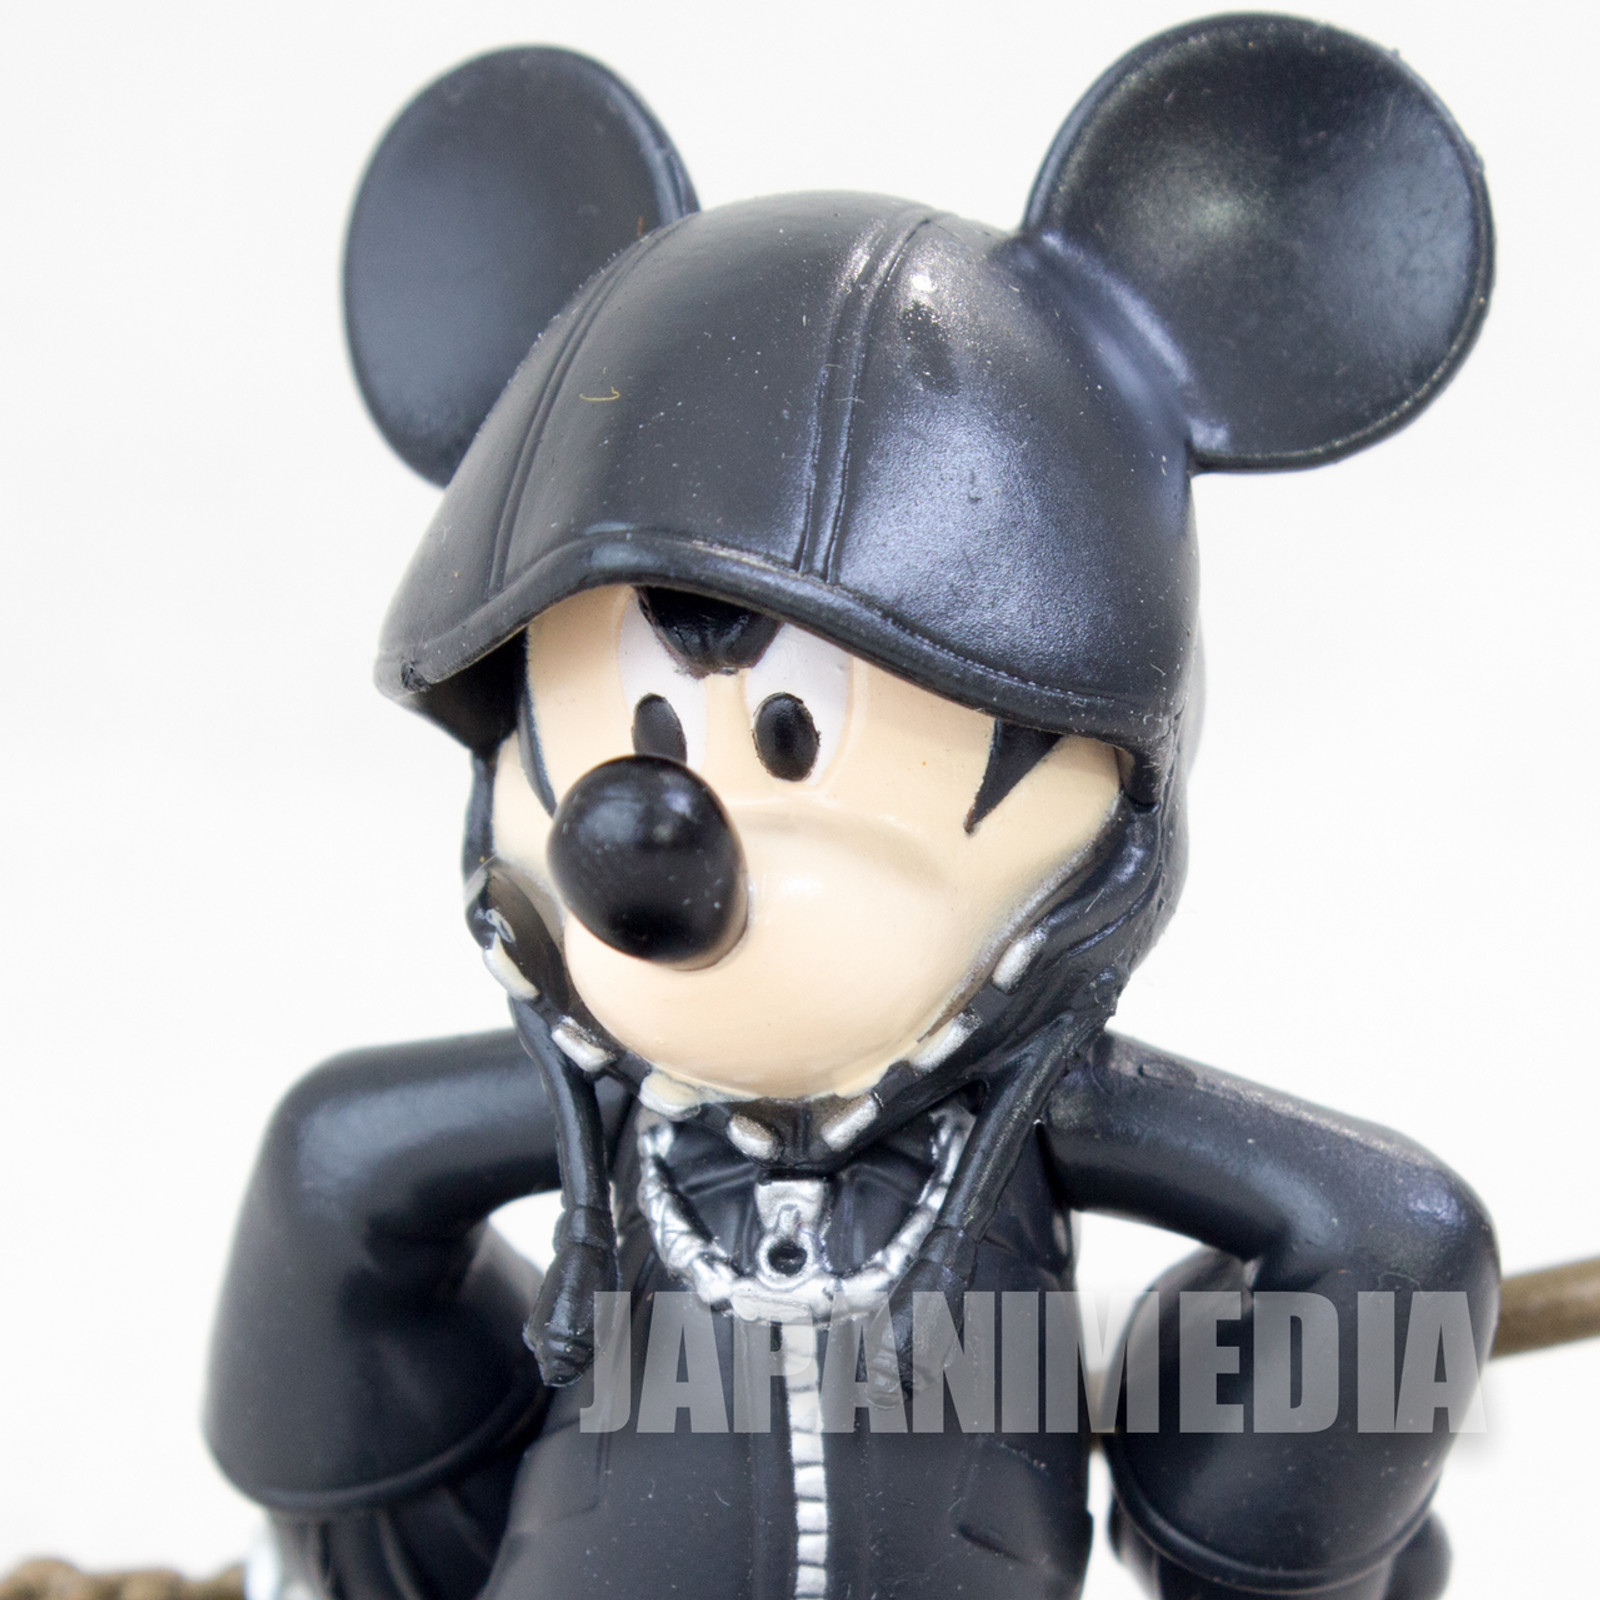 Kingdom Hearts King (Mickey Mouse) Disney Magical Collection Figure Tomy JAPAN